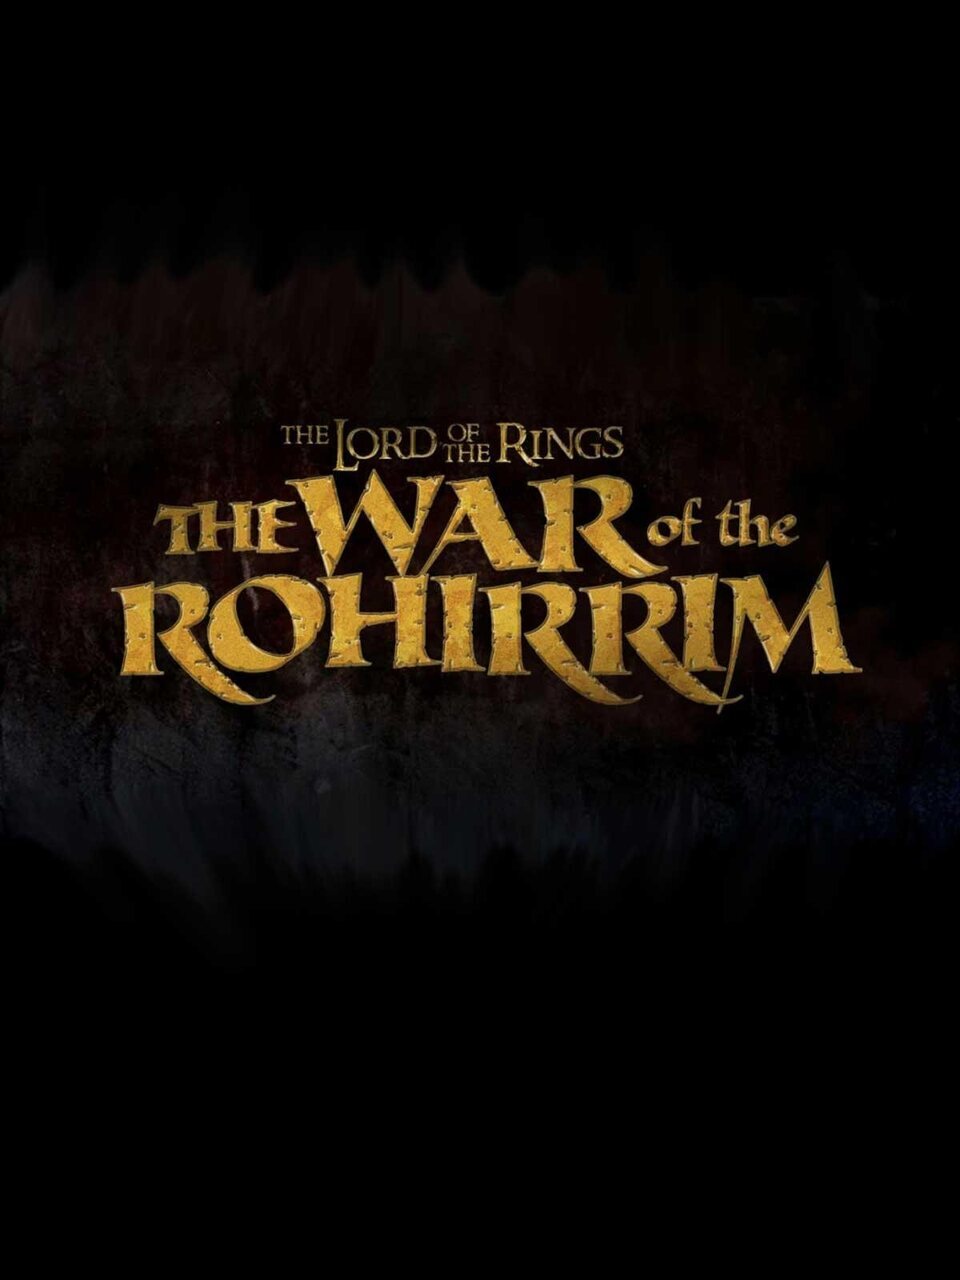 Cartel de The Lord of the Rings: The War of the Rohirrim - Cartel provisional